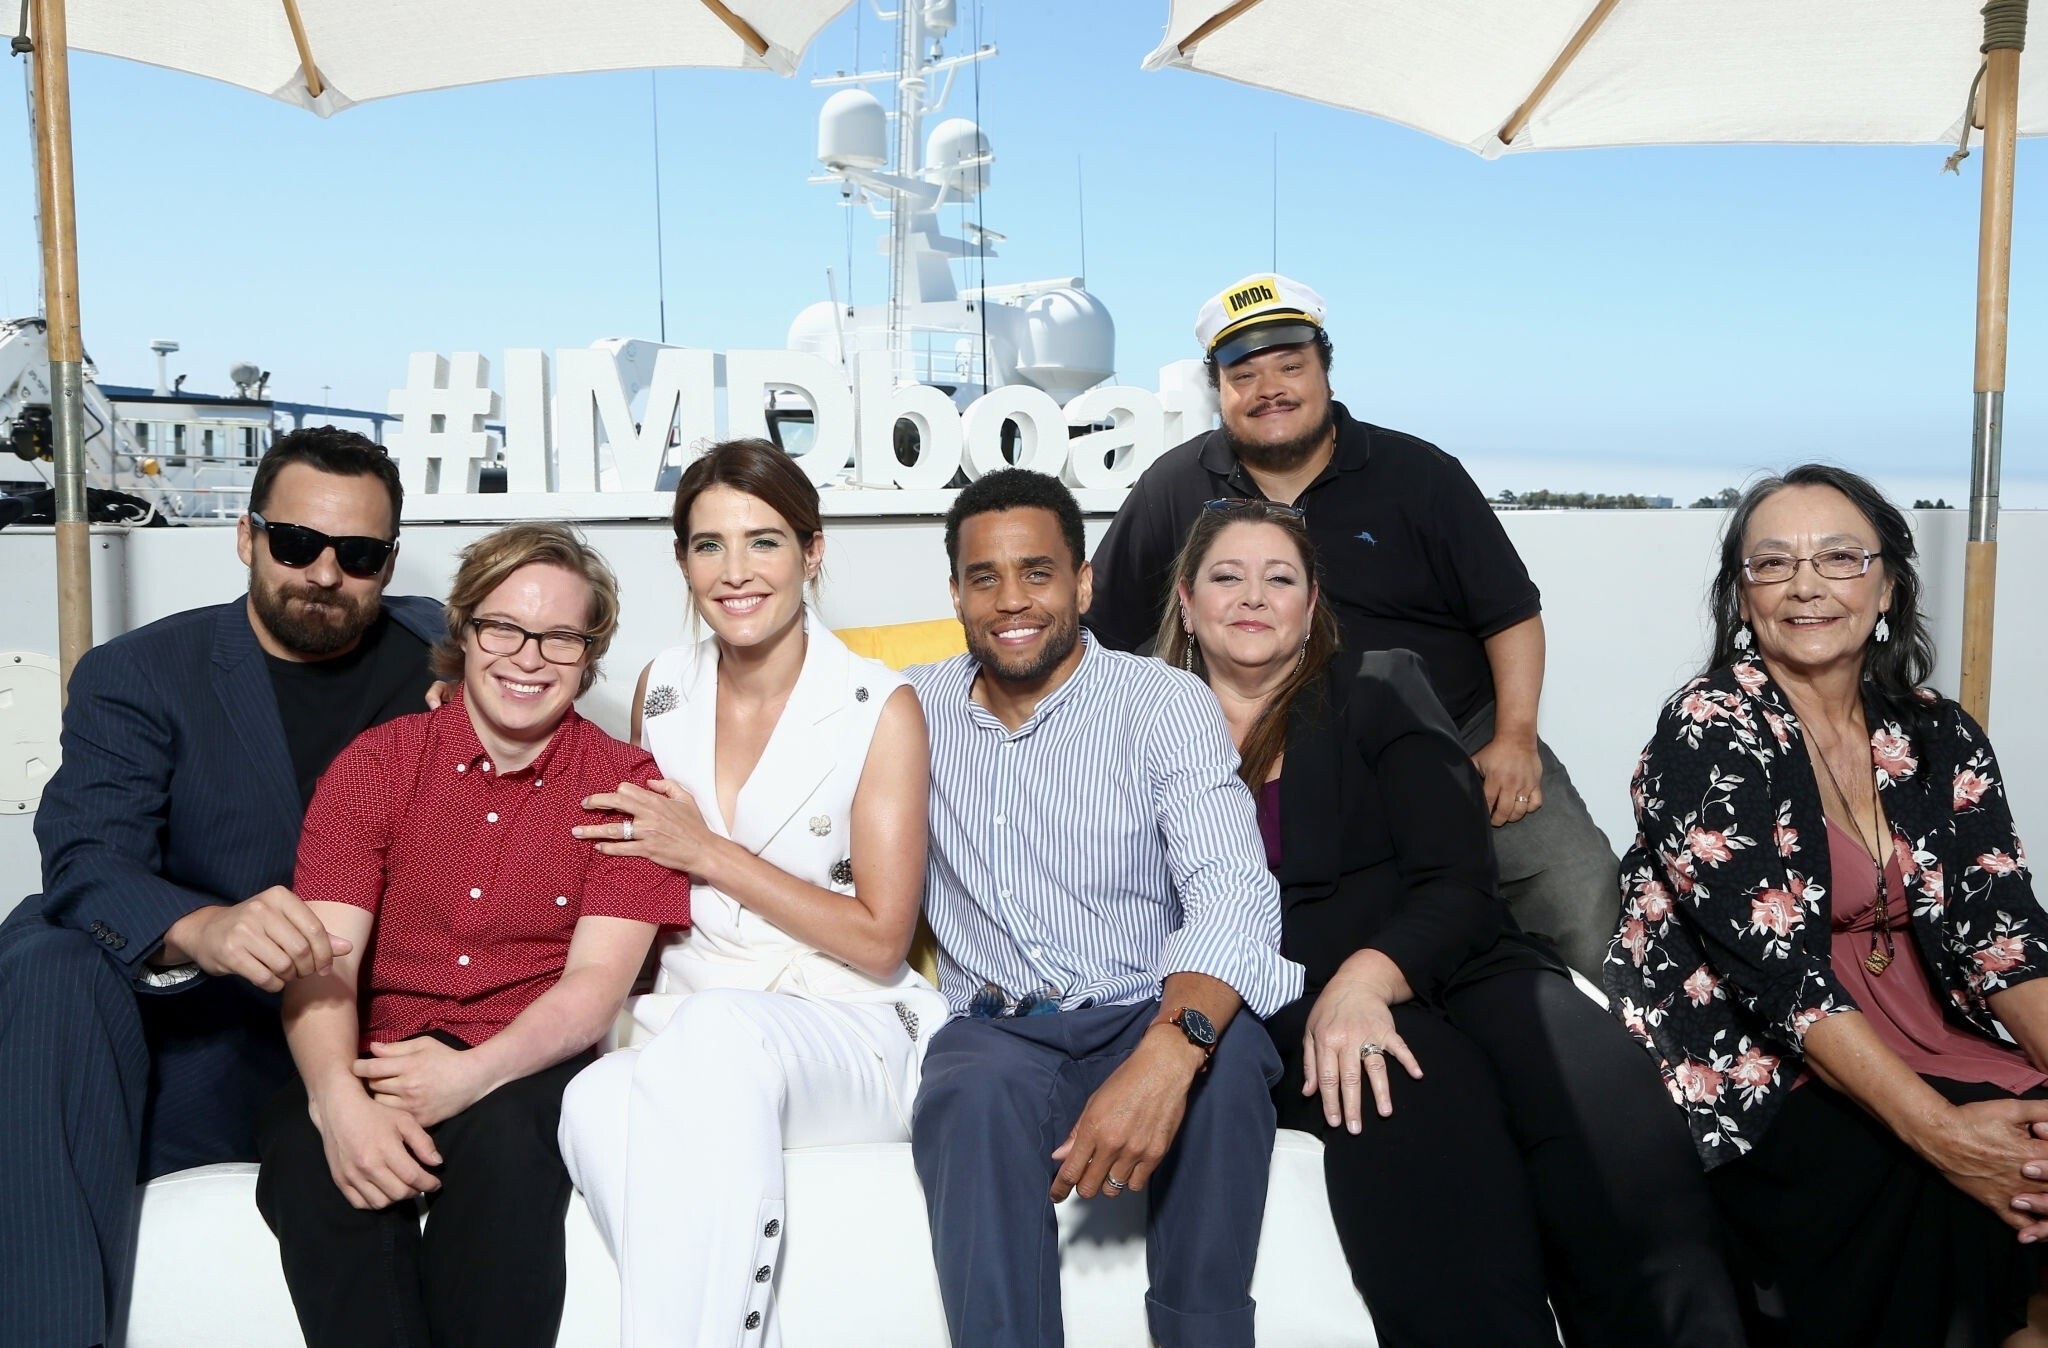 Cobie Smulders In IMDB Boat At San Diego Comic Con 2019